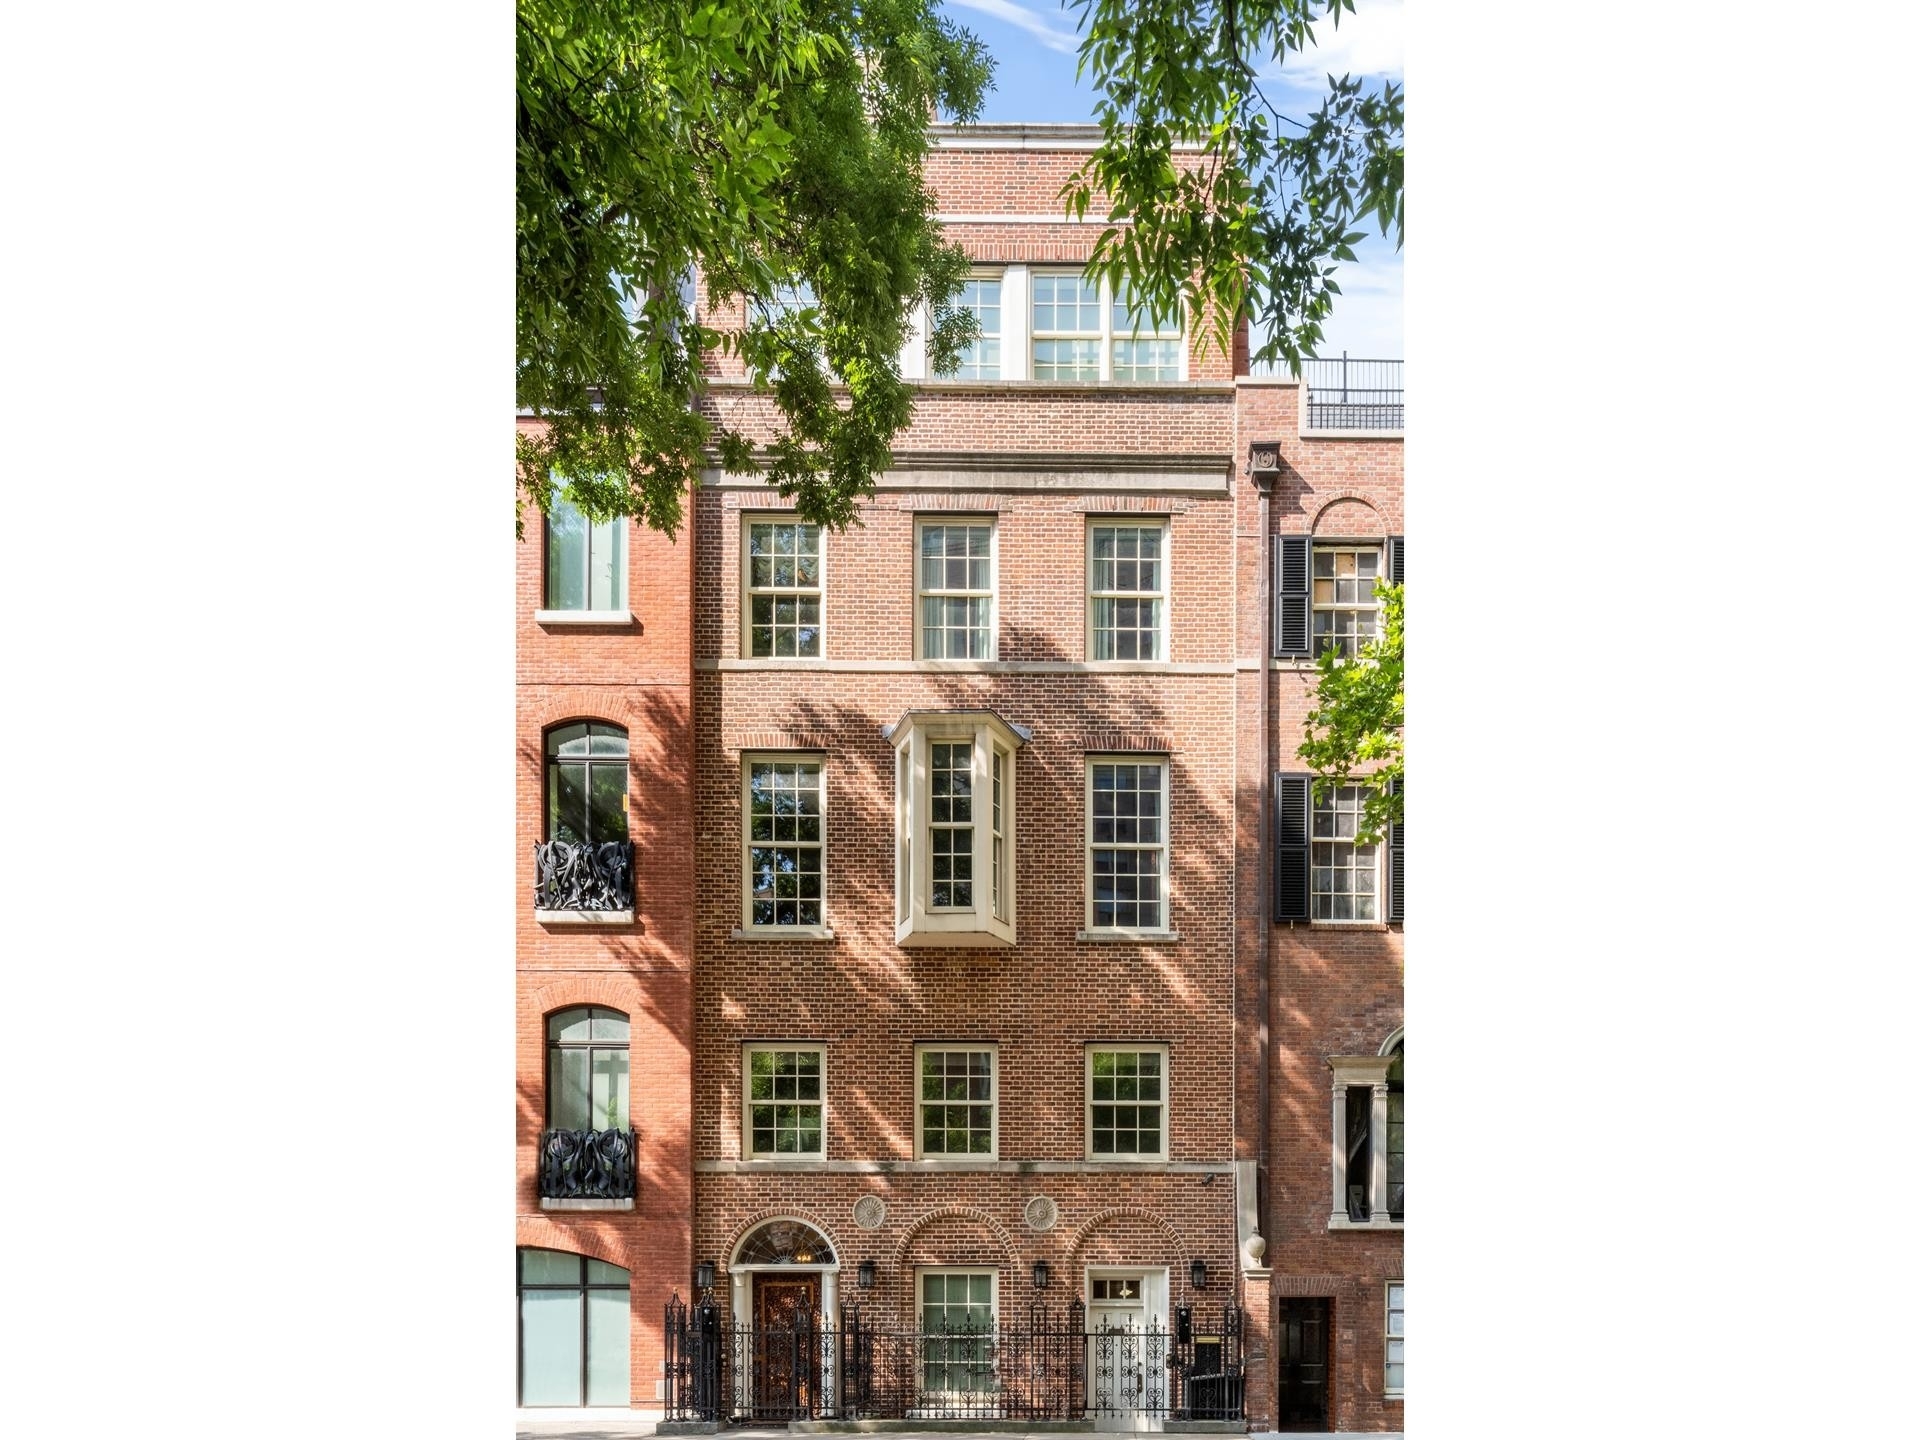 6 SUTTON SQ, TOWNHOUSE New York, NY 10022